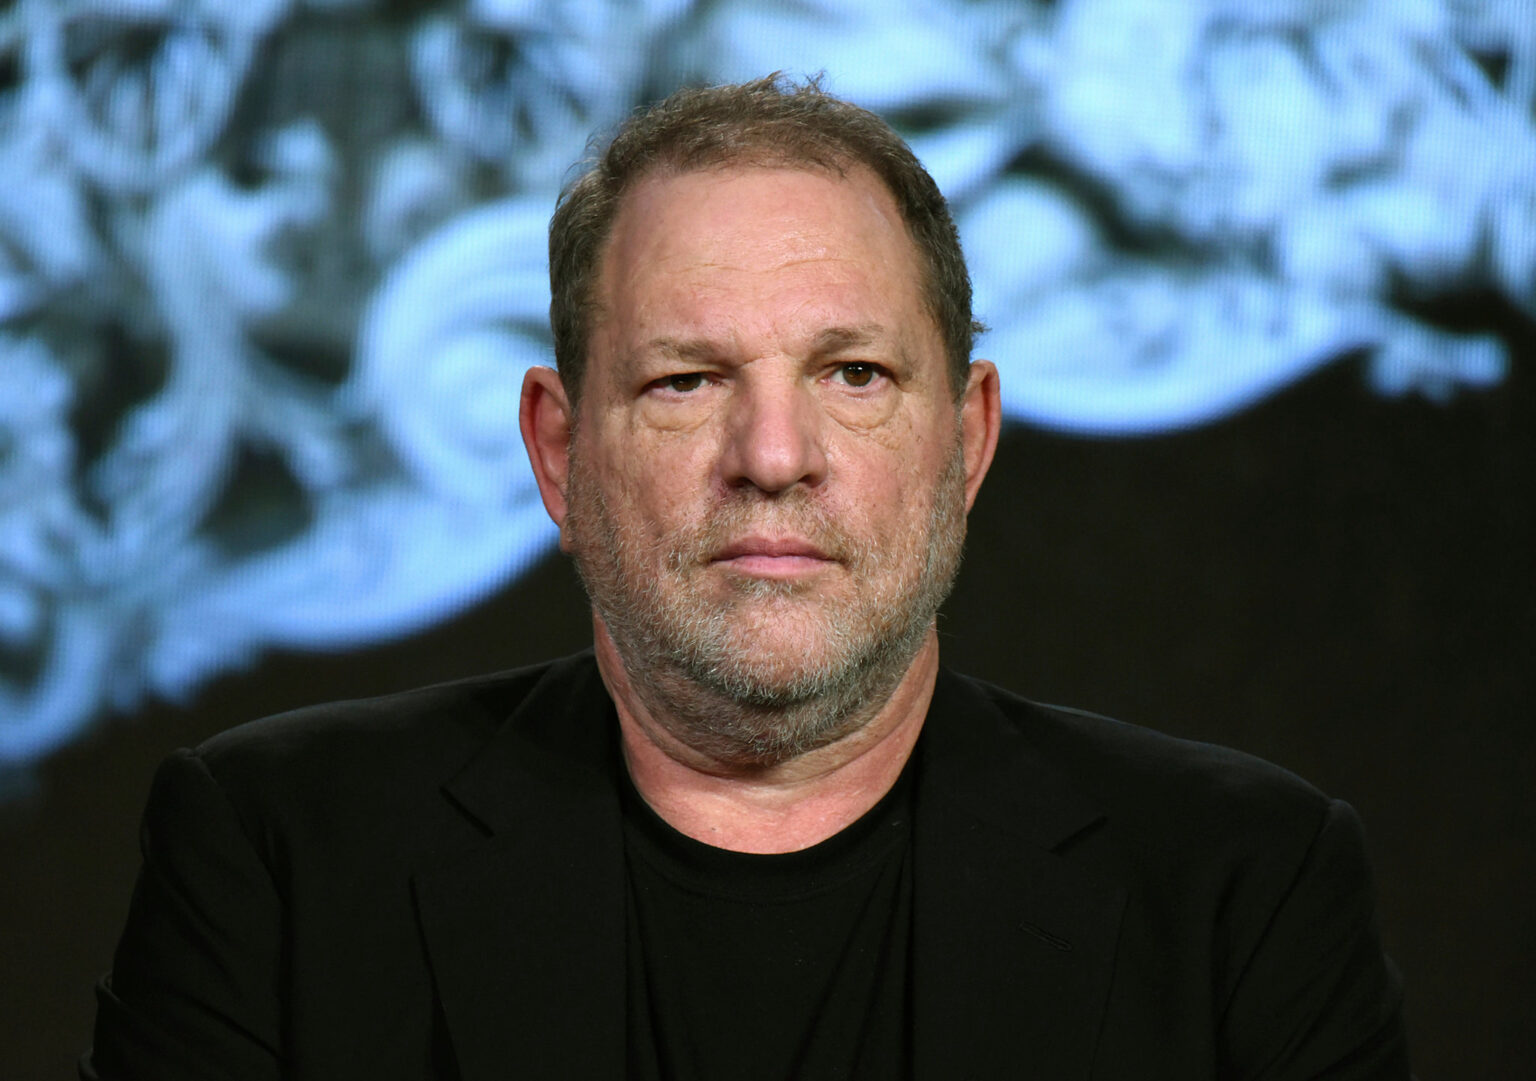 Let’s take a look at five ways Hollywood has changed its hiring practices and workplace policies in the wake of Harvey Weinstein.